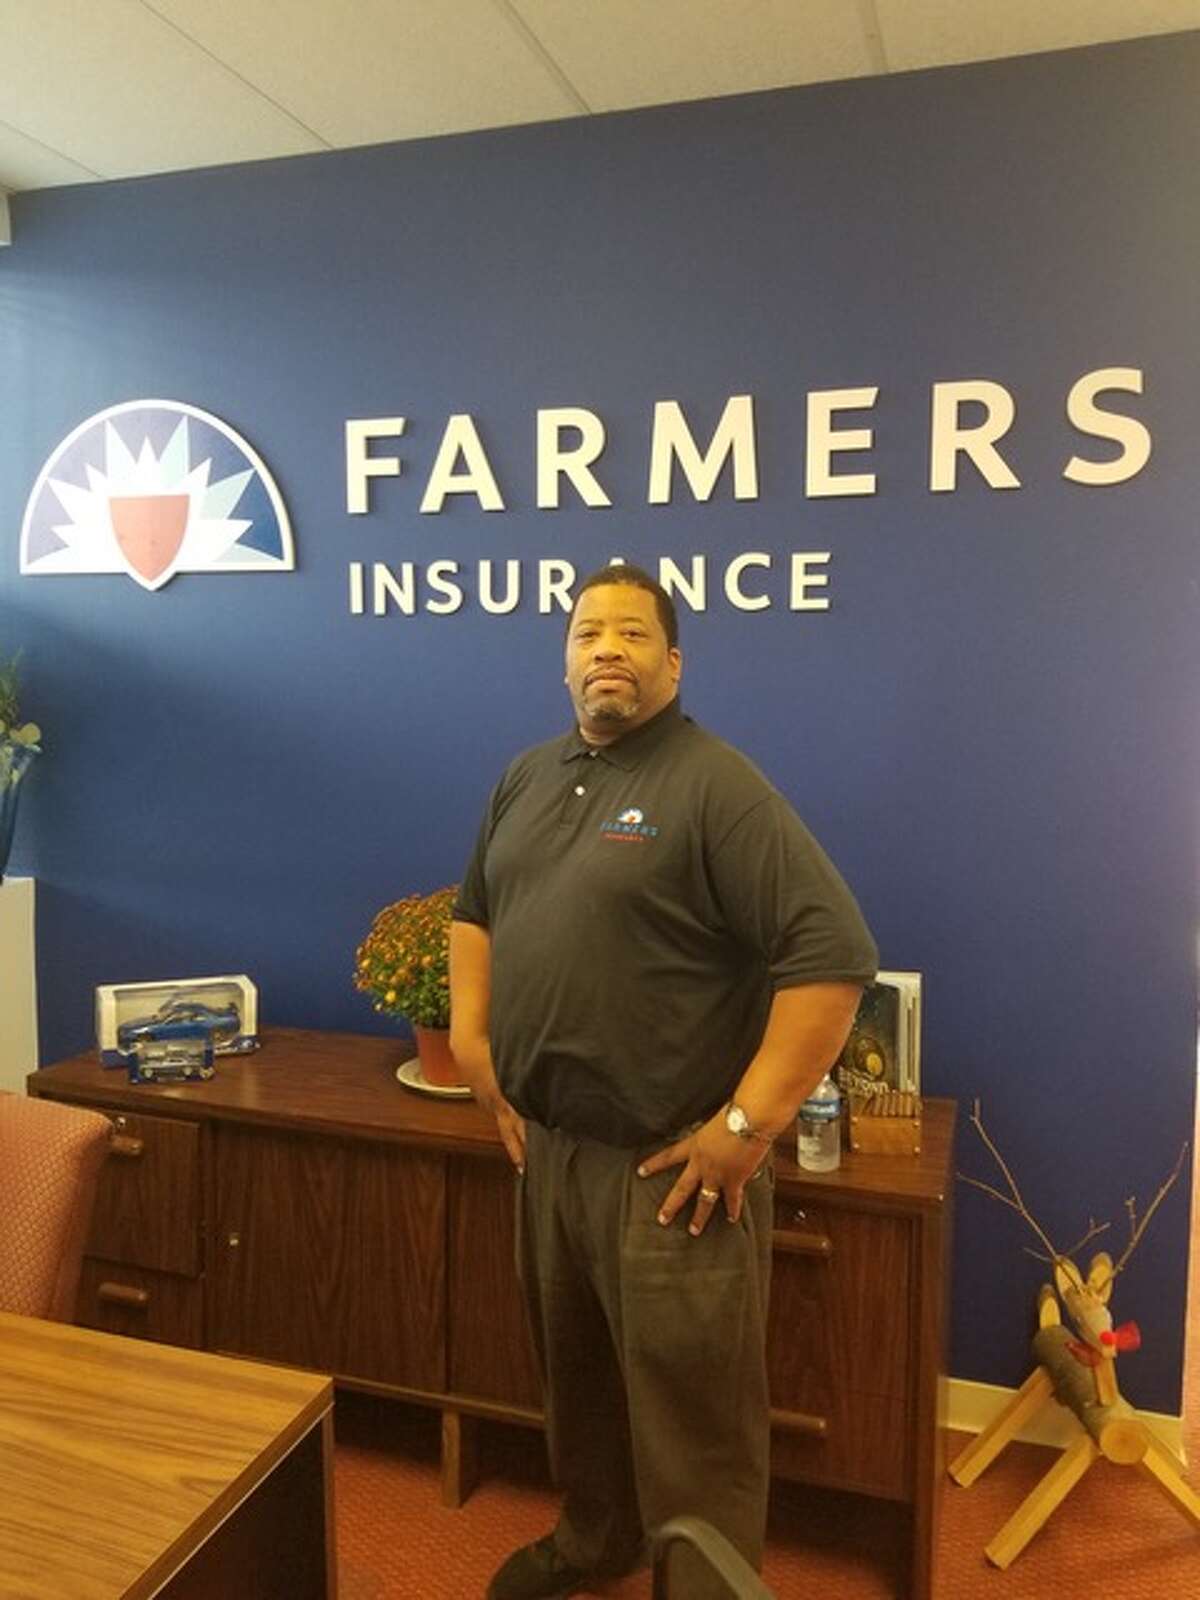 Dennis Perkins came to SCORE to organize production and marketing for his entertainment promotions business. Working with SCORE mentors prompted Perkins to open a local insurance agency. His Farmers Insurance franchise is now the third new business producer in Connecticut.